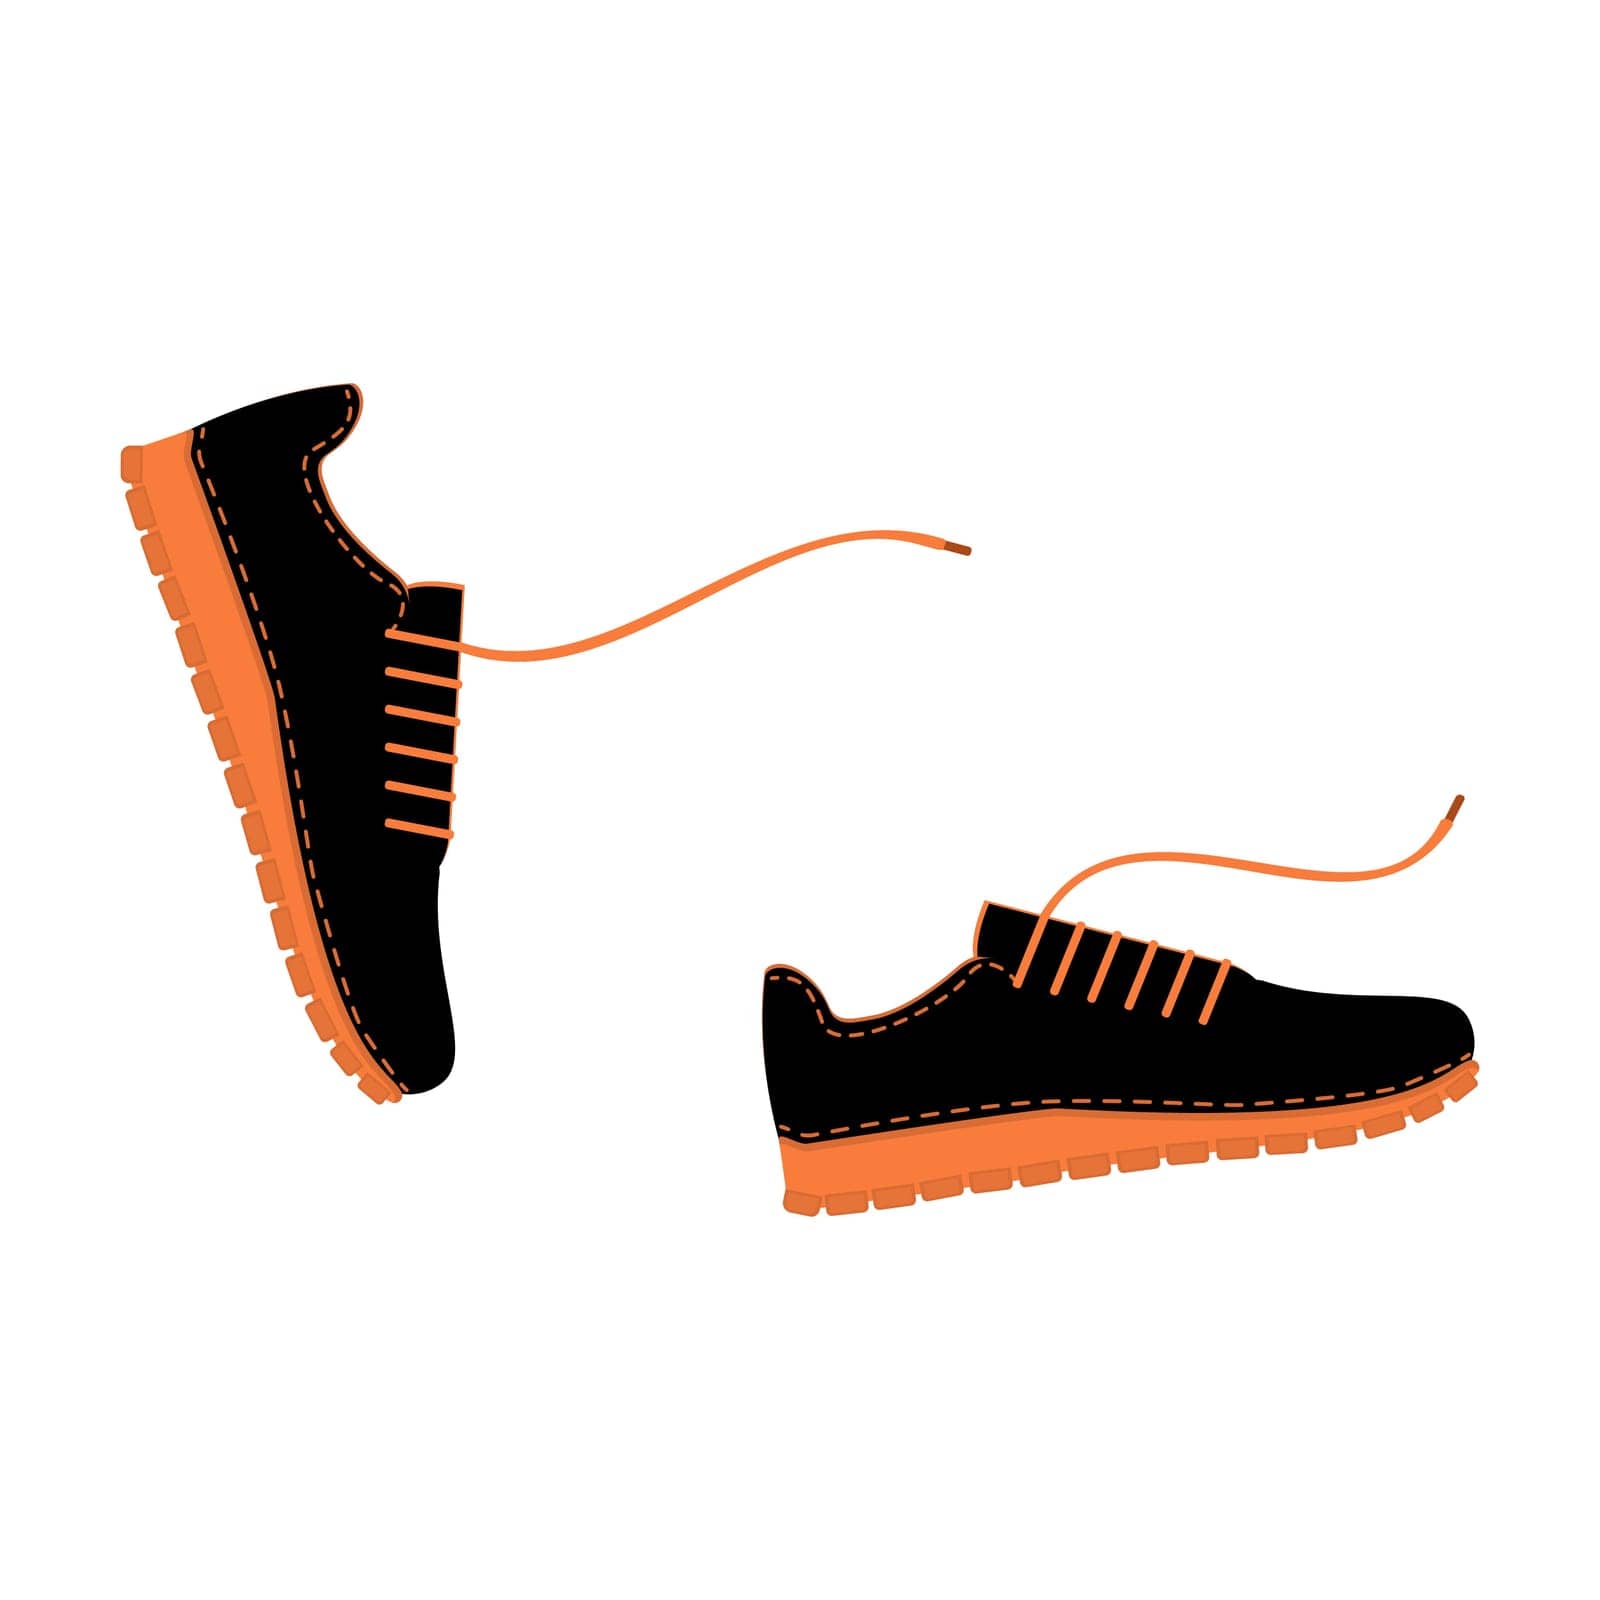 Running, moving in sport shoes. Classic sneakers in flat style with laces. Sport footwear for men and women. Vector fashion illustration. Step, walk in a pair of sneakers with shoelaces. Youth style.